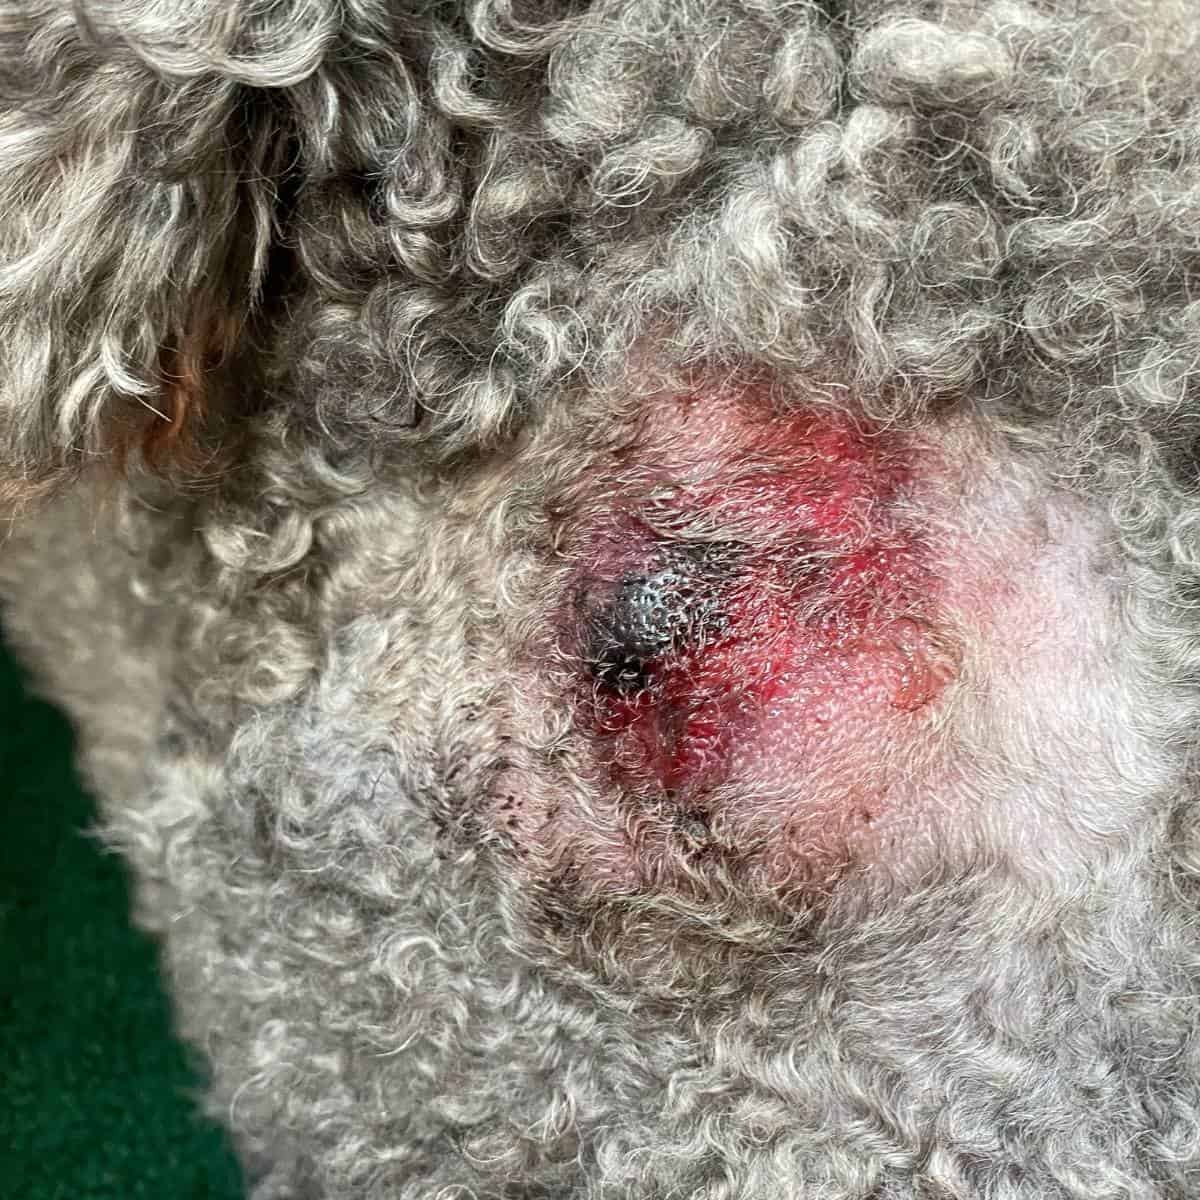 Folliculitis in Dogs + How To Treat (including natural remedies)